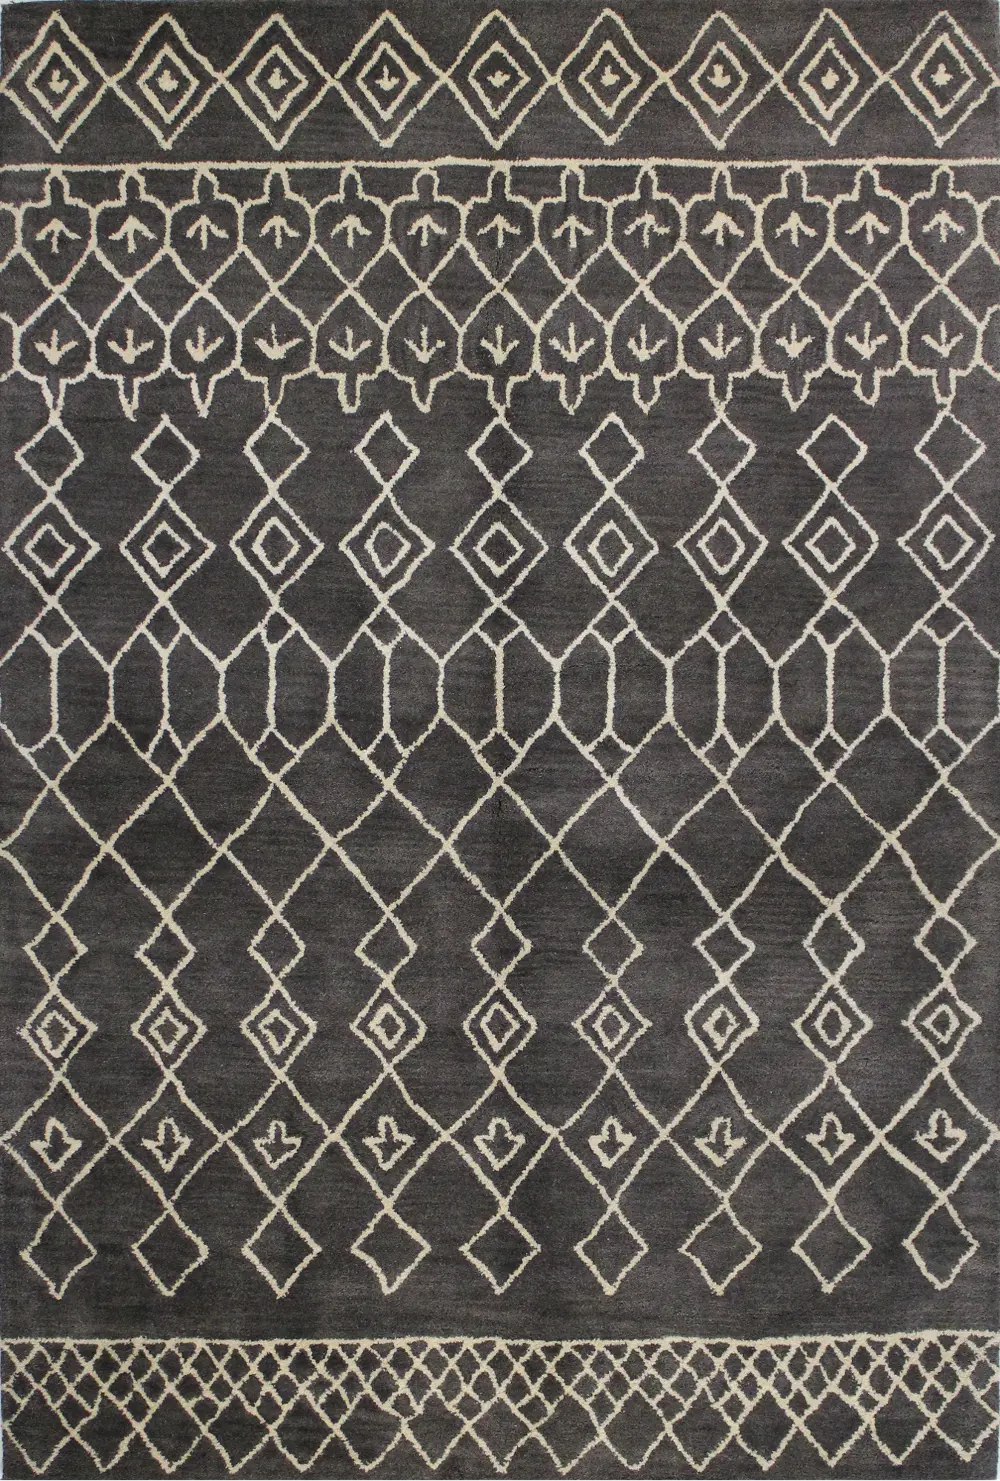 S185-CHAR-8X10-ST258 8 x 10 Large Charcoal Gray Area Rug - Chelsea-1